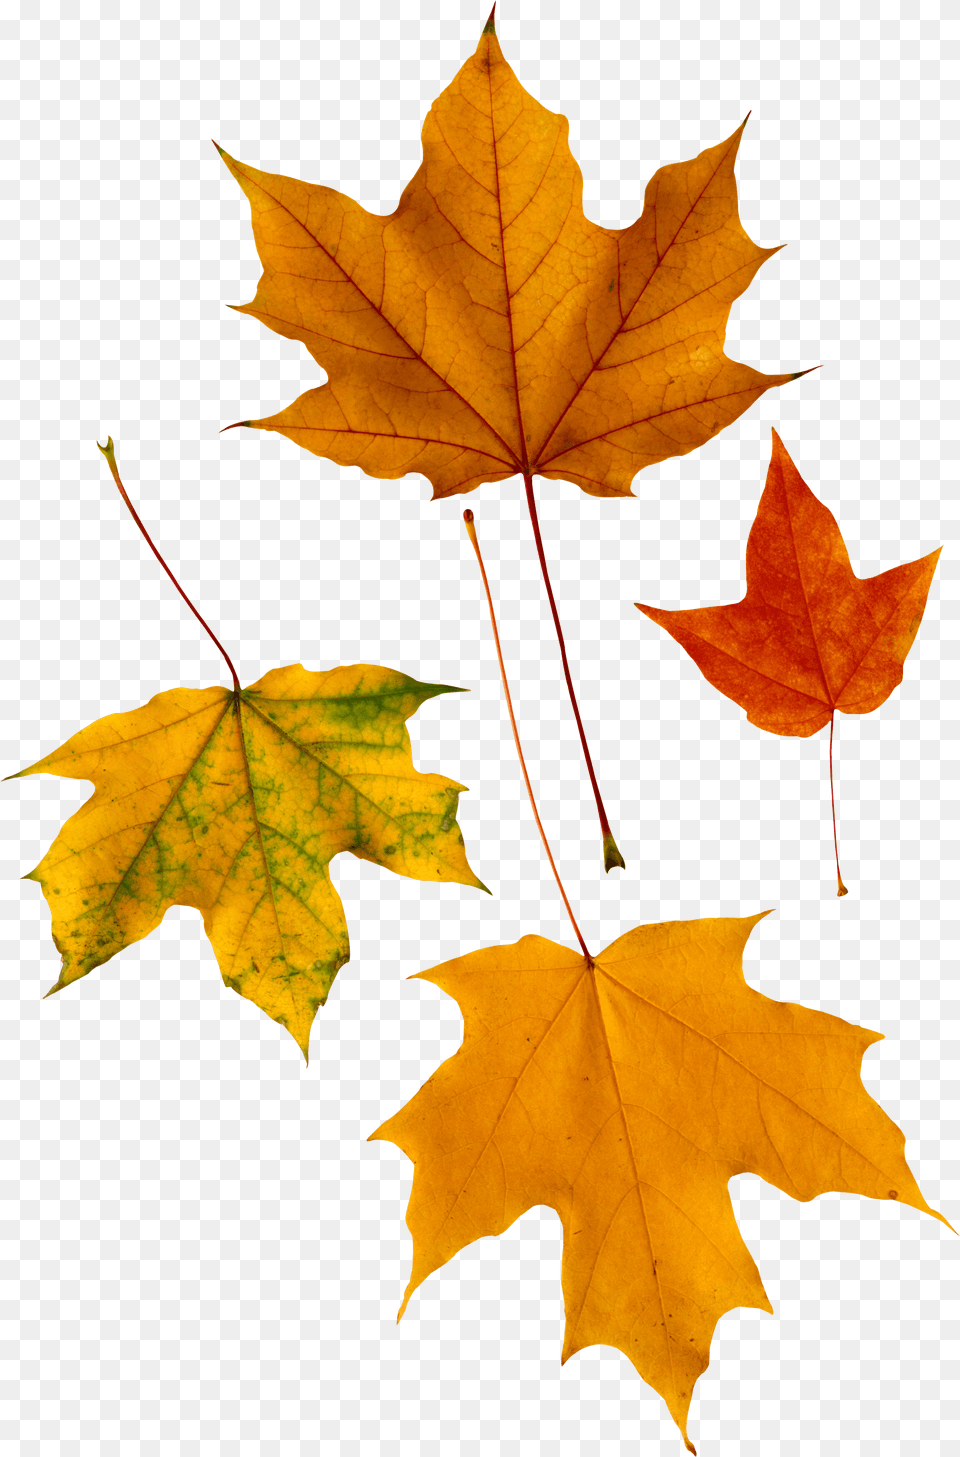 Autumn Leaf Trend Enterprises Classic Accents Maple Leaves Varietypk Discovery, Plant, Tree, Maple Leaf Png